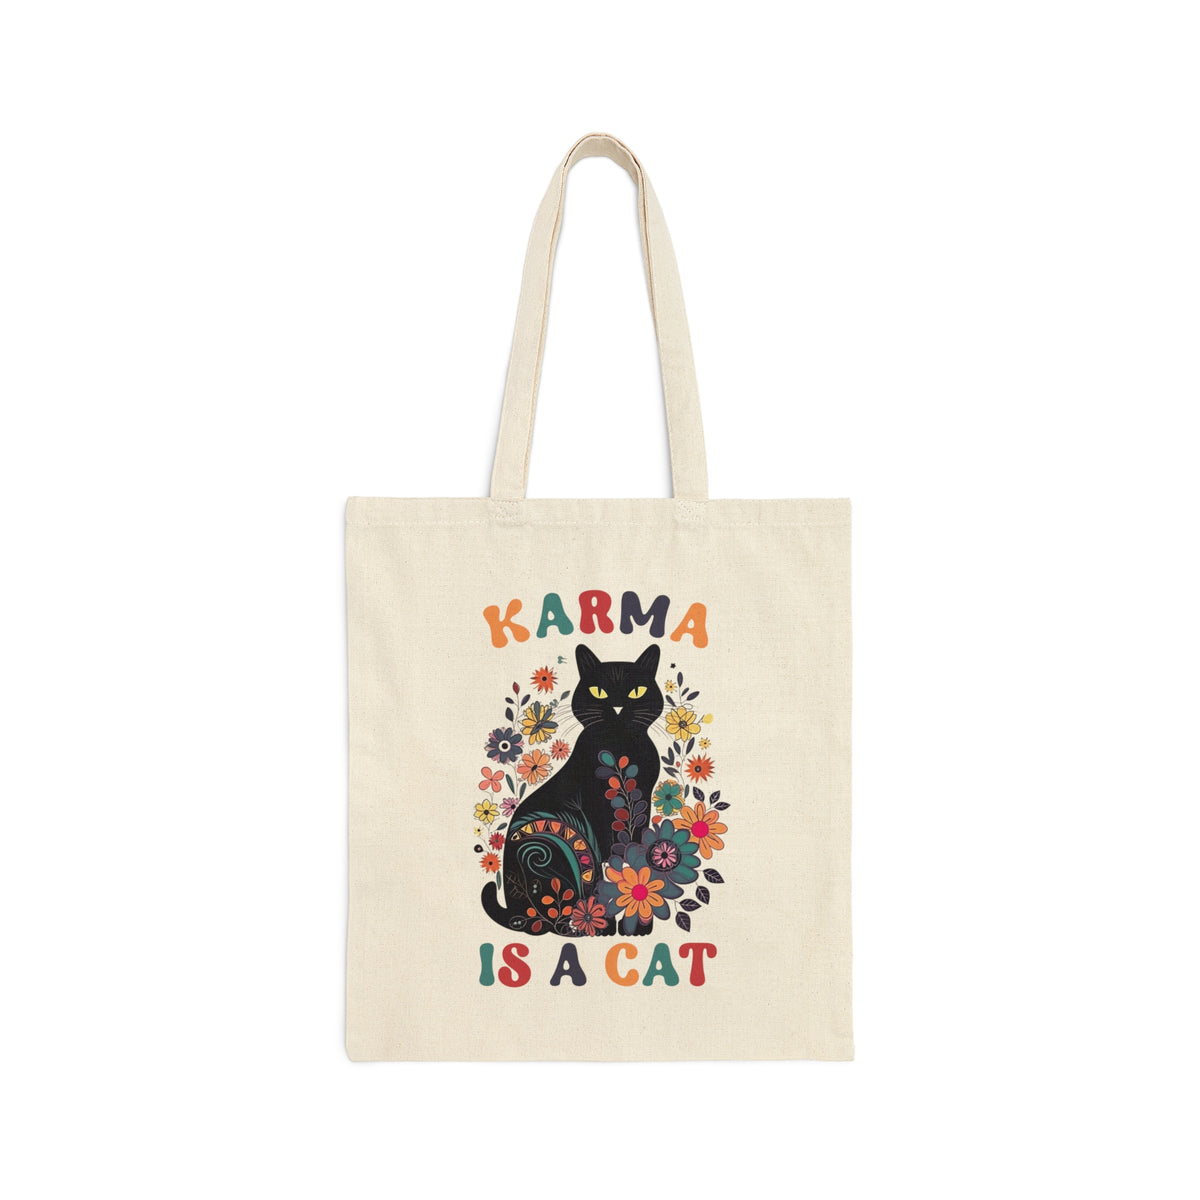 Karma Is a Cat Tote Bag | Funny Cat Shirt | Karma Bag | Mystical Tote | Black Cat Lover Gift | Cotton Canvas Tote Bag